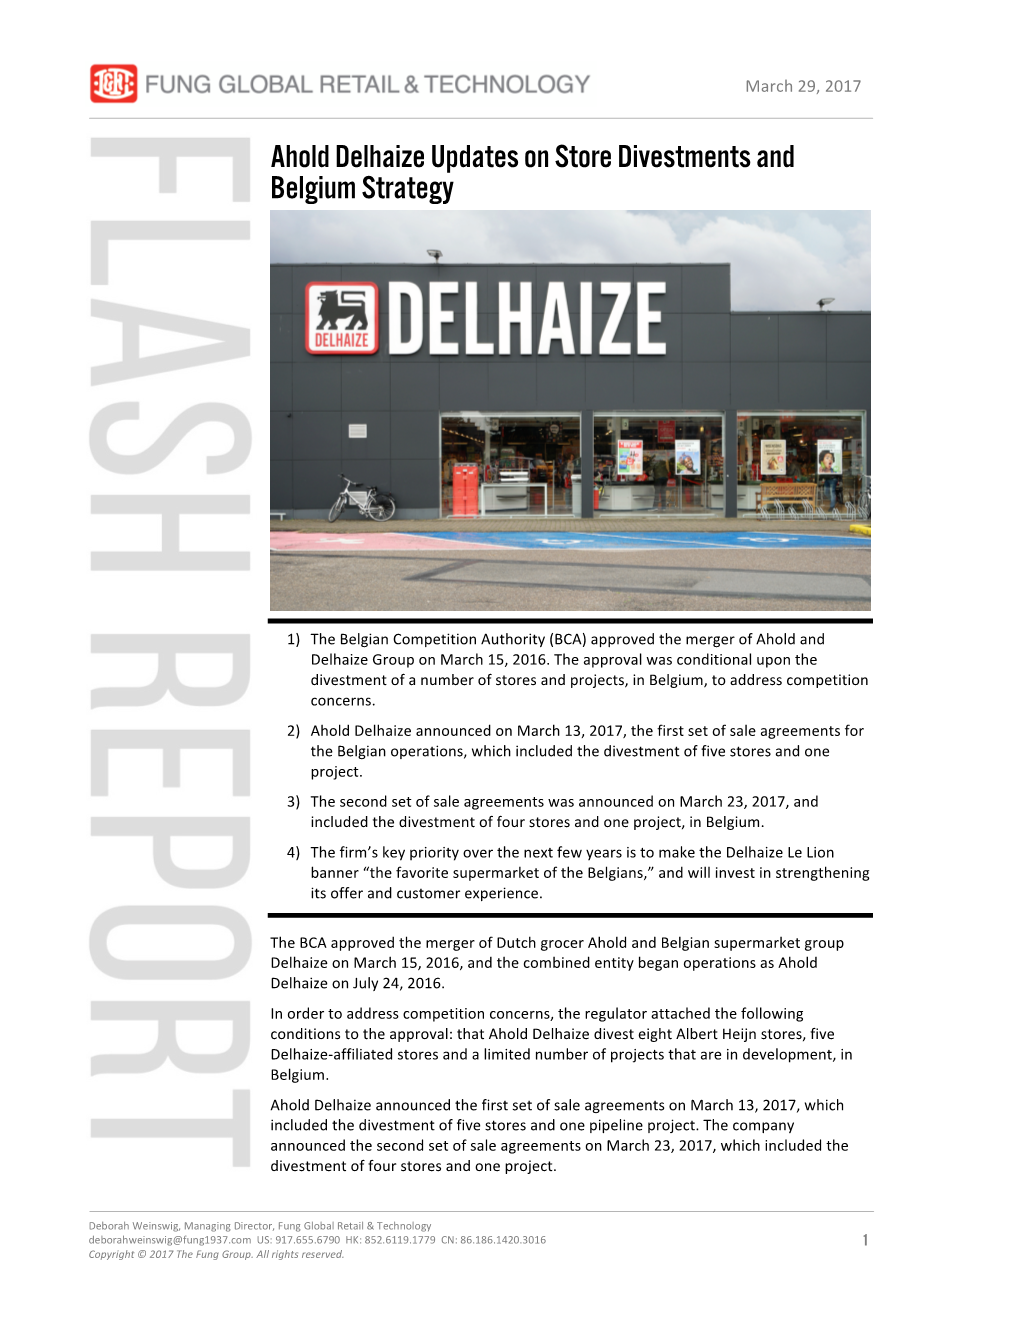 Ahold Delhaize Updates on Store Divestments and Belgium Strategy